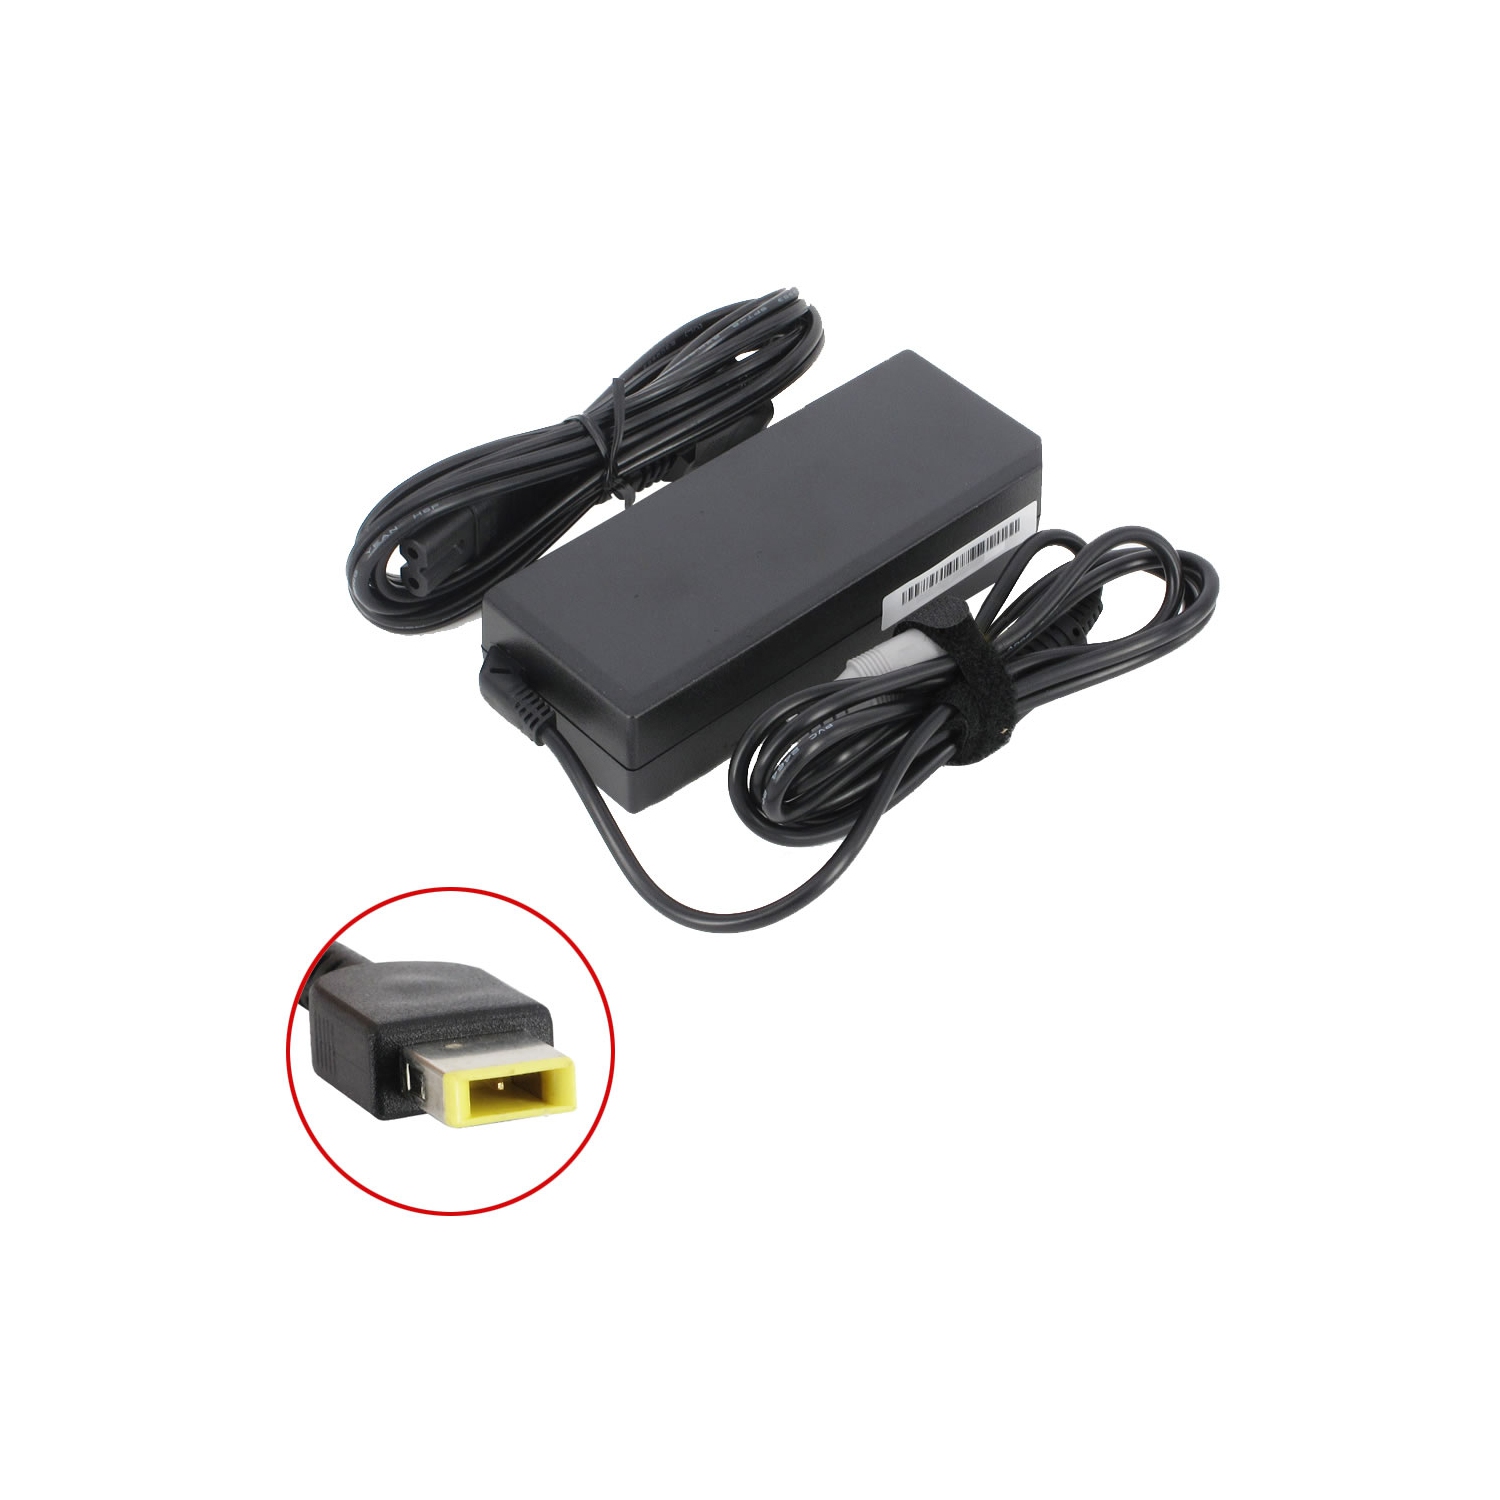 Brand New Laptop AC Adapter for Lenovo Ideapad 300-15ISK 80Q70021US, 0B47455, 45N0247, ADLX45NDC3A, ADLX65NLC3A, 36200235